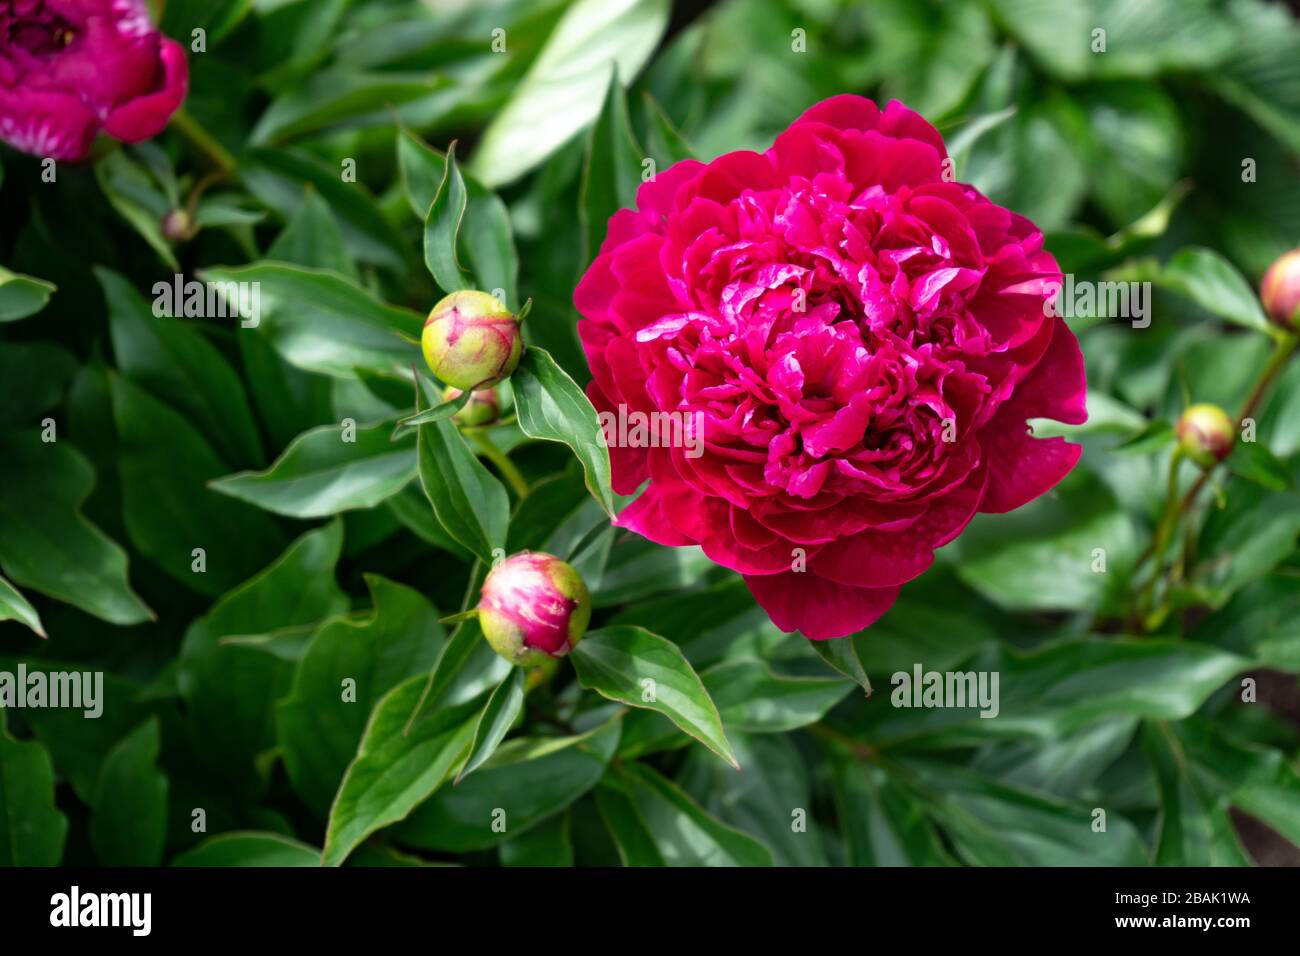 Red peony flower on a background of green leaves in the garden Stock Photo